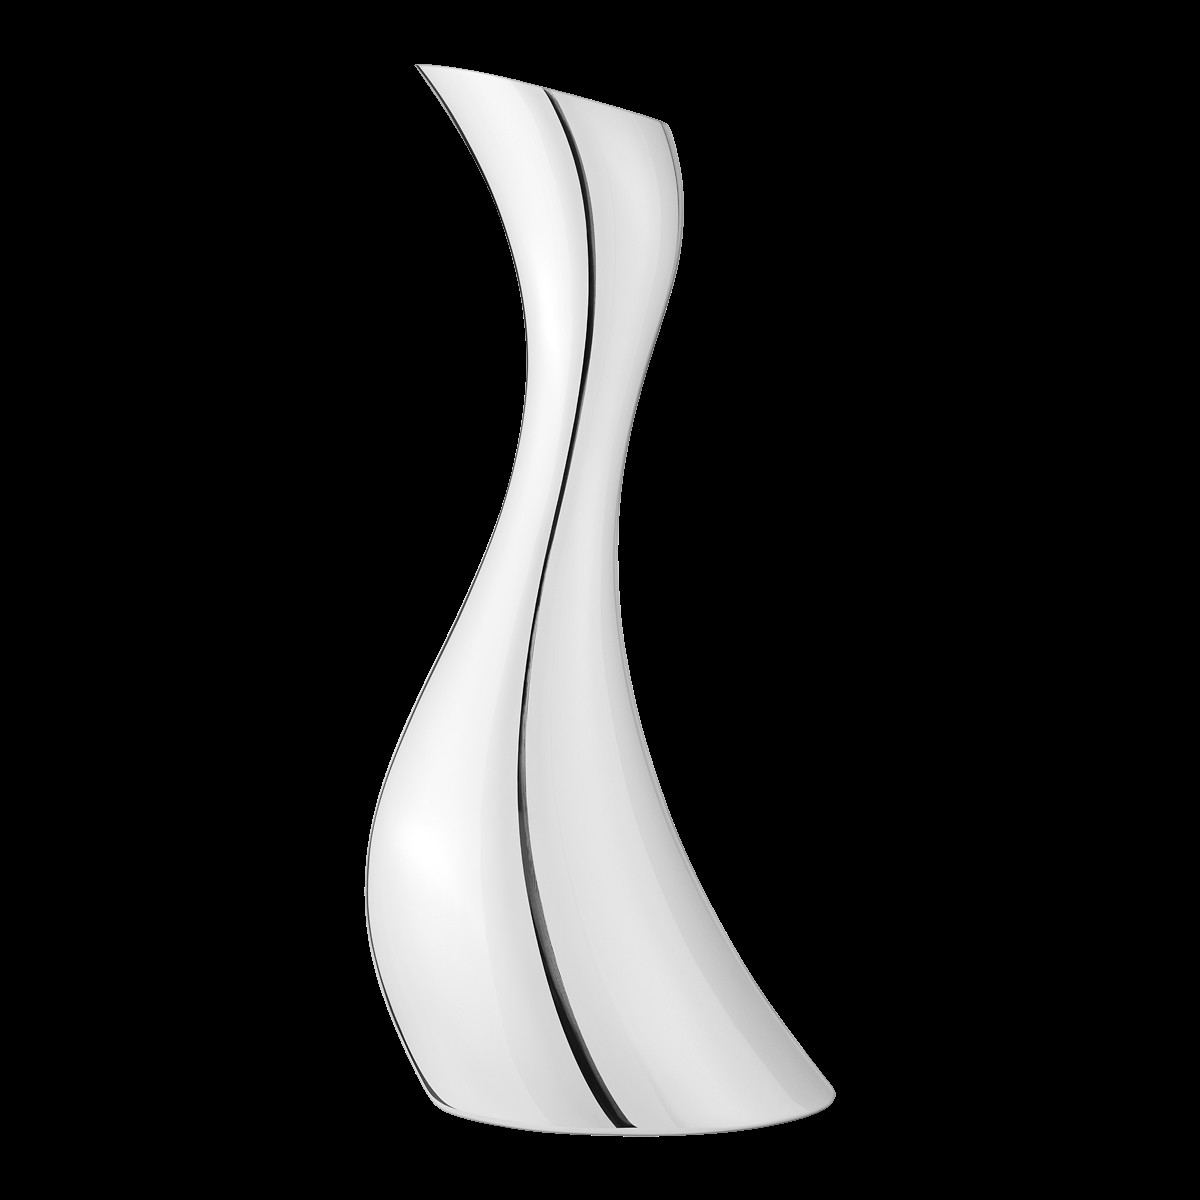 21 Lovable George Jensen Vase 2024 free download george jensen vase of cobra iconic curved pitcher in stainless steel georg jensen throughout pack 3586611 1200 0